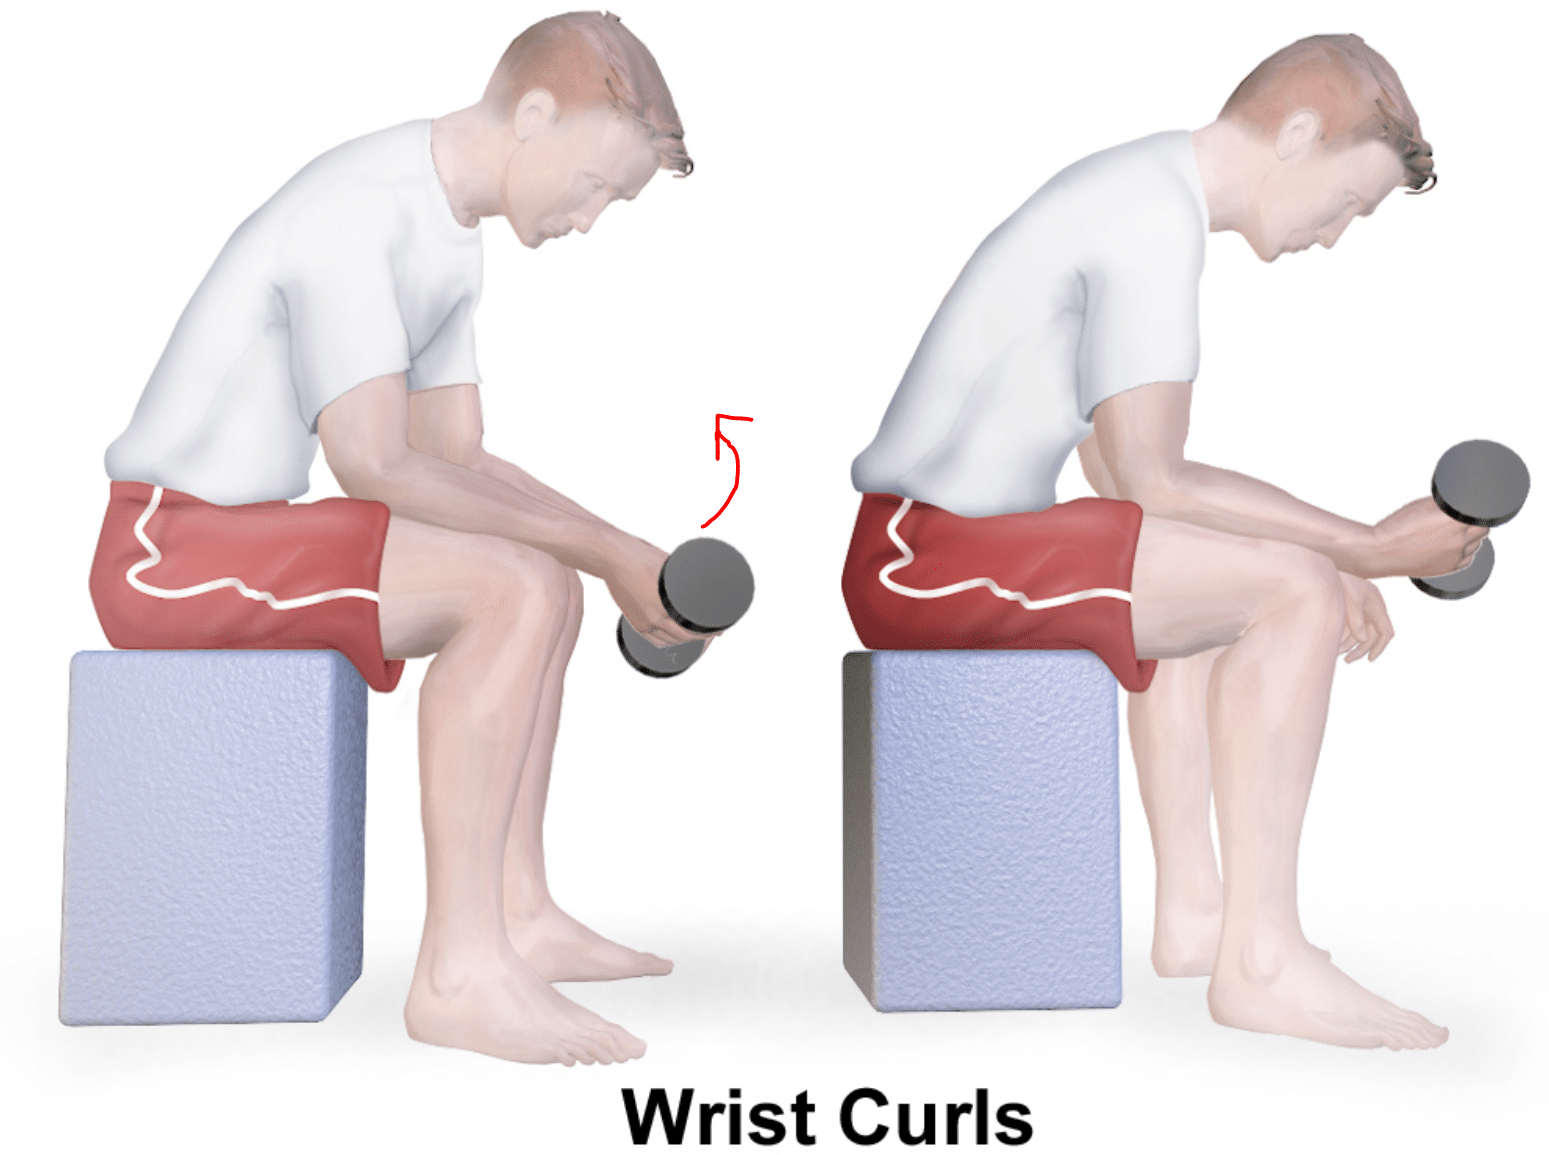 Use wrist curls to strengthen your muscles and reduce numbness while riding a mountain bike